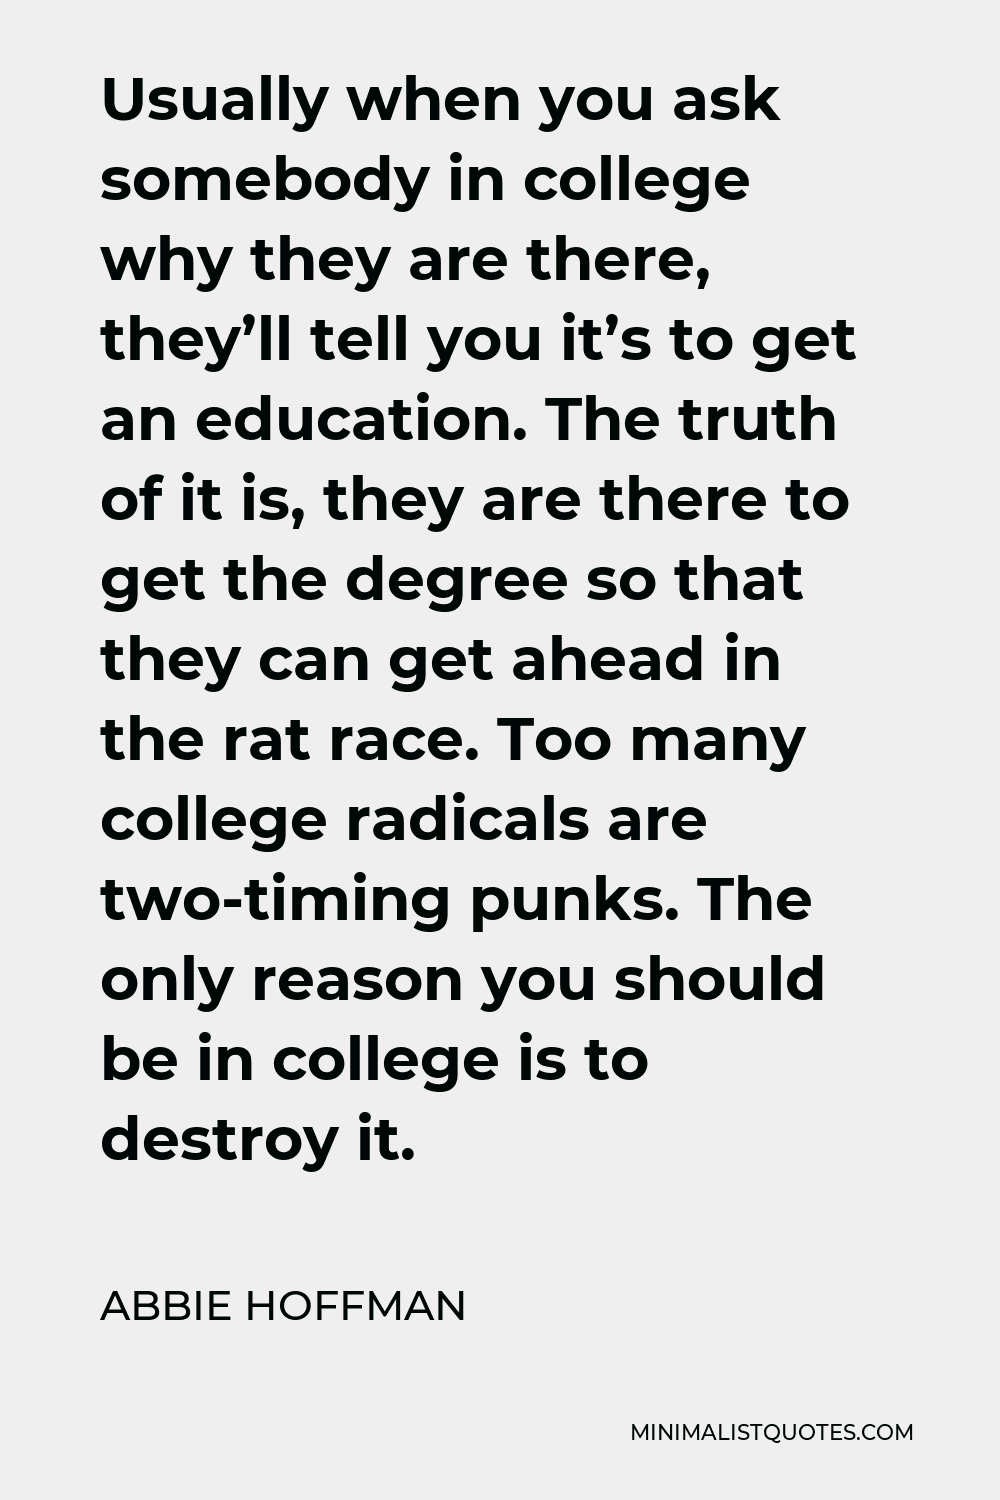 Abbie Hoffman Quote - Usually when you ask somebody in college why they are there, they’ll tell you it’s to get an education. The truth of it is, they are there to get the degree so that they can get ahead in the rat race. Too many college radicals are two-timing punks. The only reason you should be in college is to destroy it.